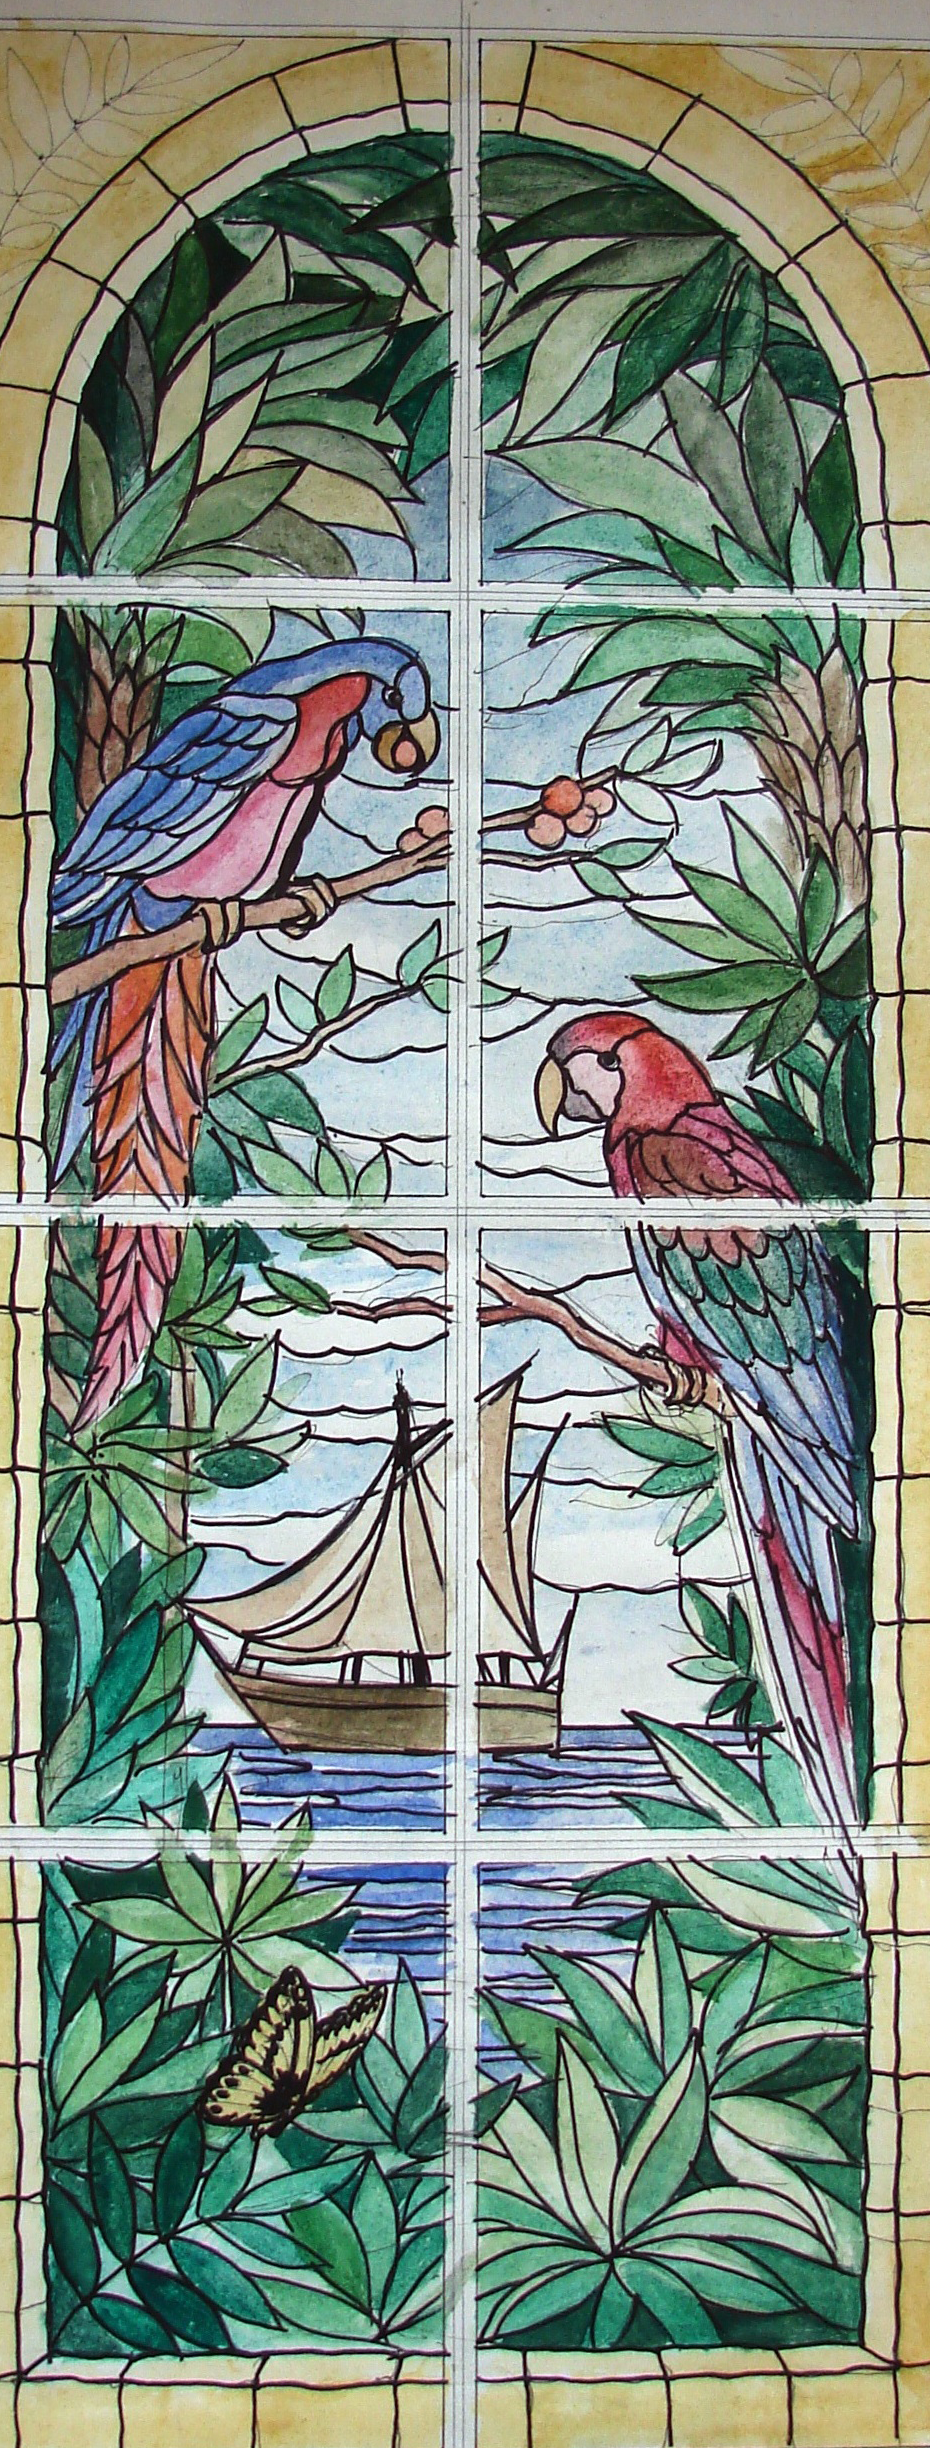 ART STAINED GLASS PAINTER RADEK PÁNÍK - „BAY WITH SAILBOATS AND PARROT“, ART CARTON AND REALIZATION